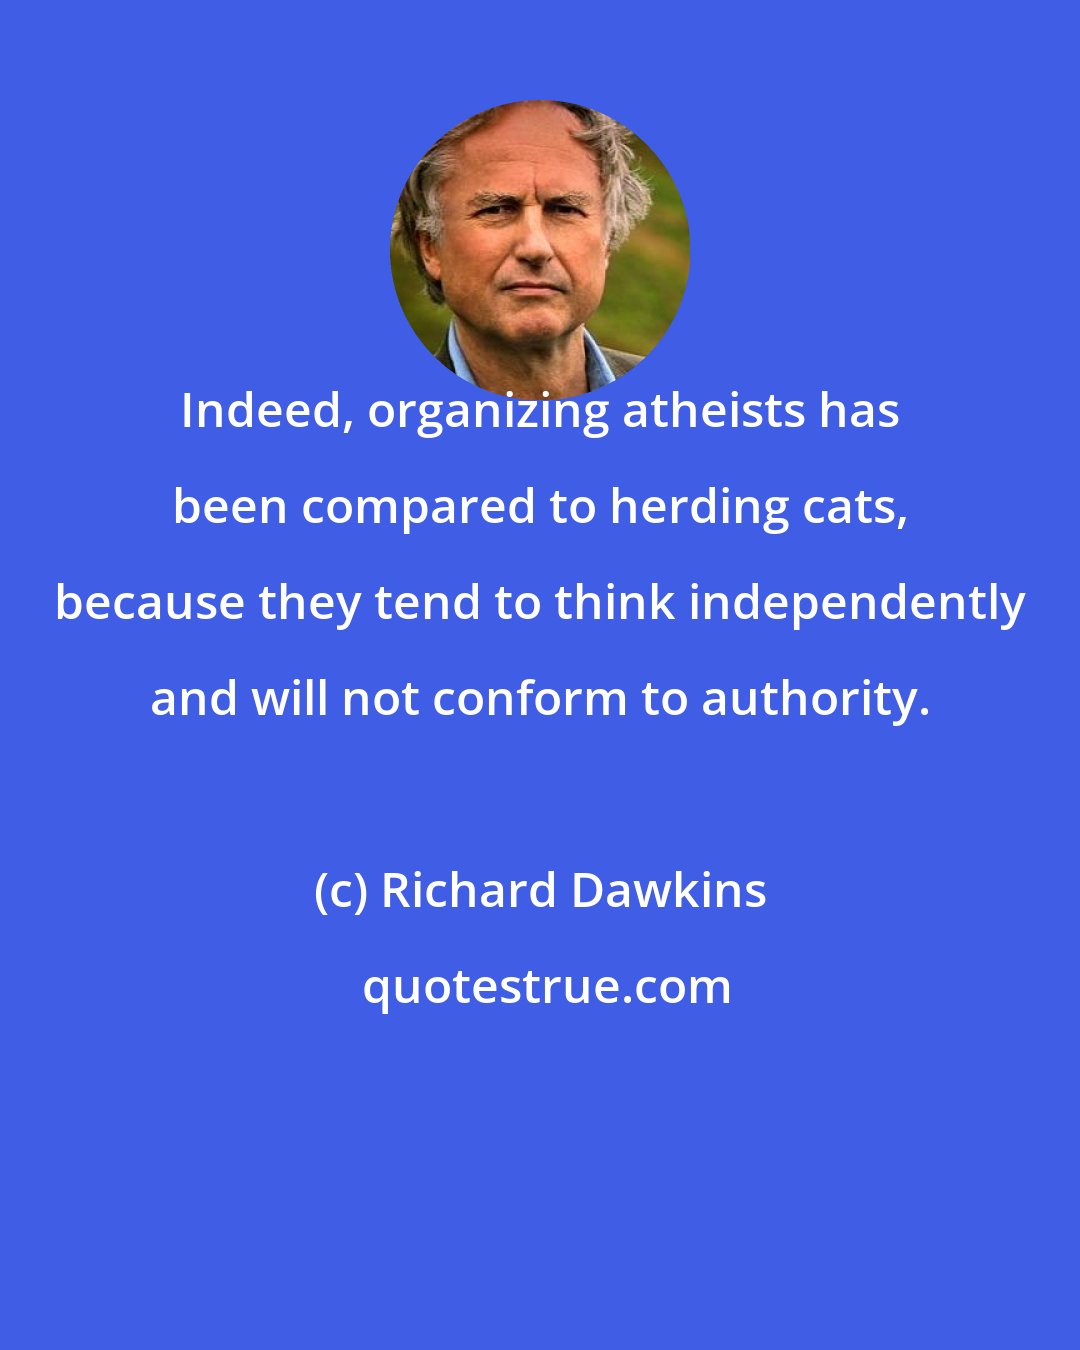 Richard Dawkins: Indeed, organizing atheists has been compared to herding cats, because they tend to think independently and will not conform to authority.